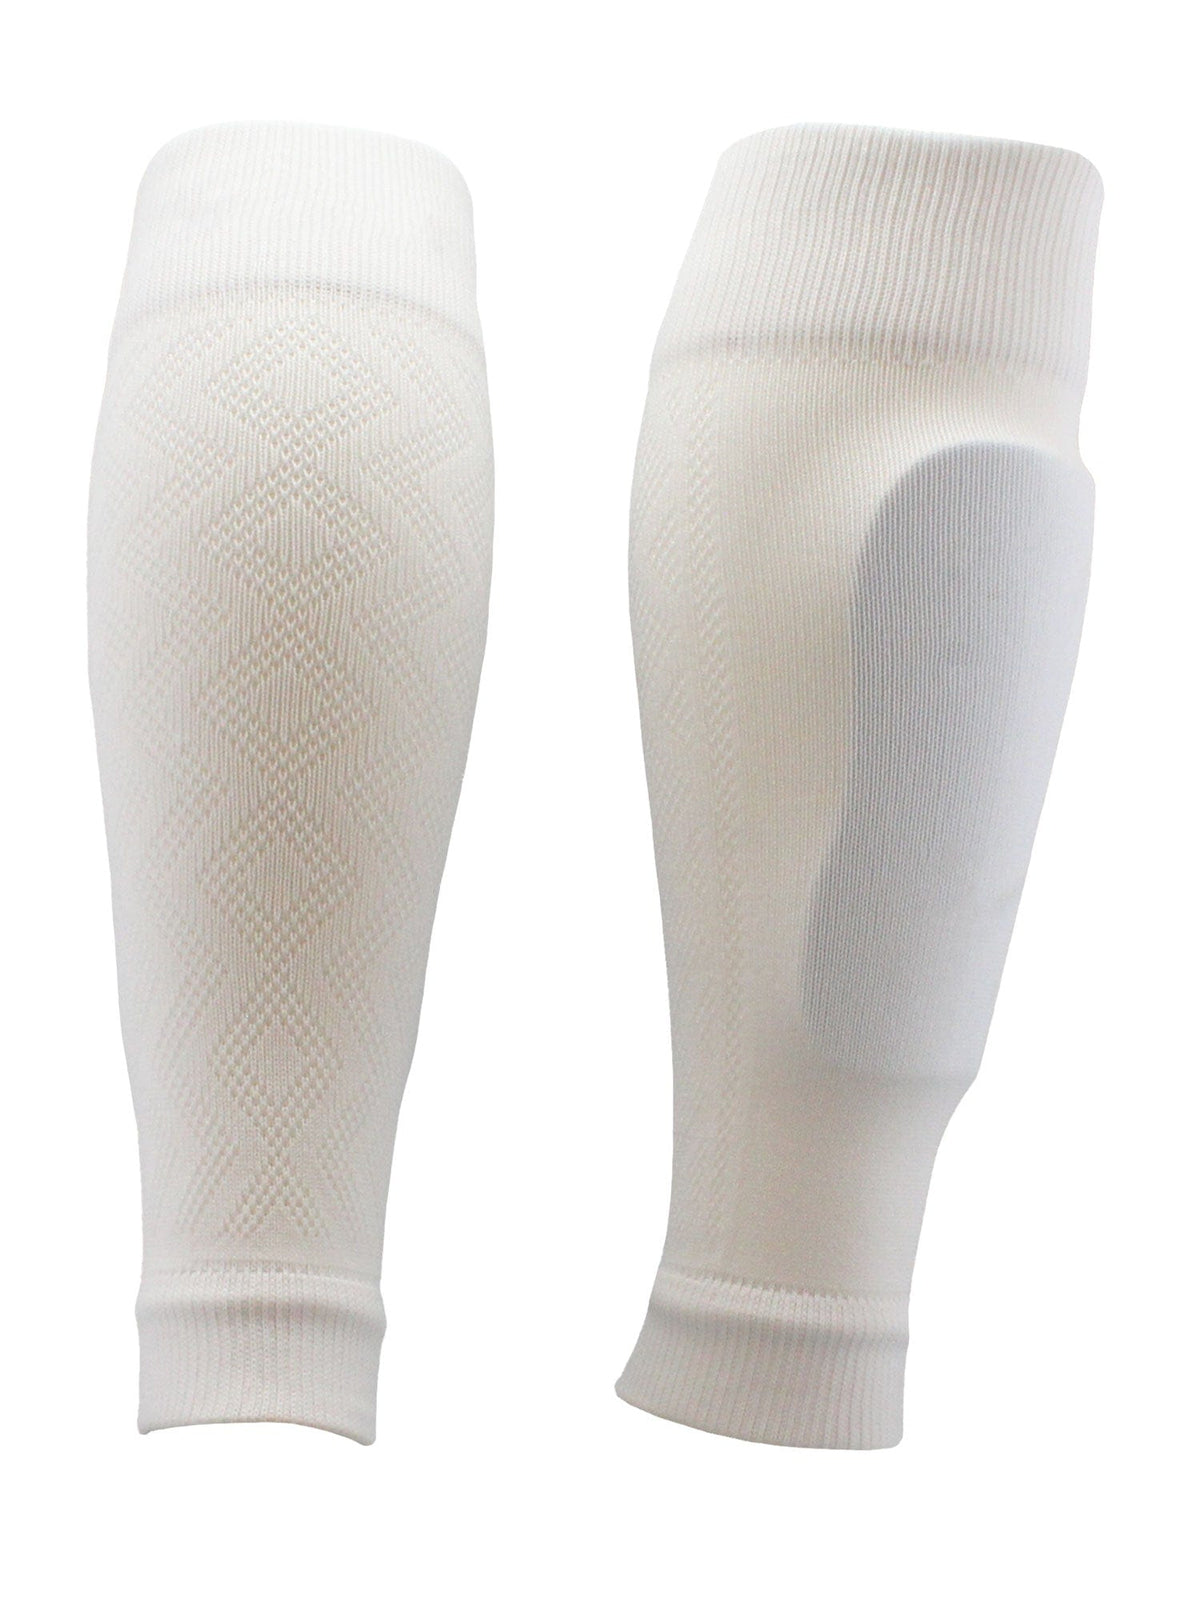 Tritanium eXtend Low Compression Calf Sleeves for Work and Travel (white)